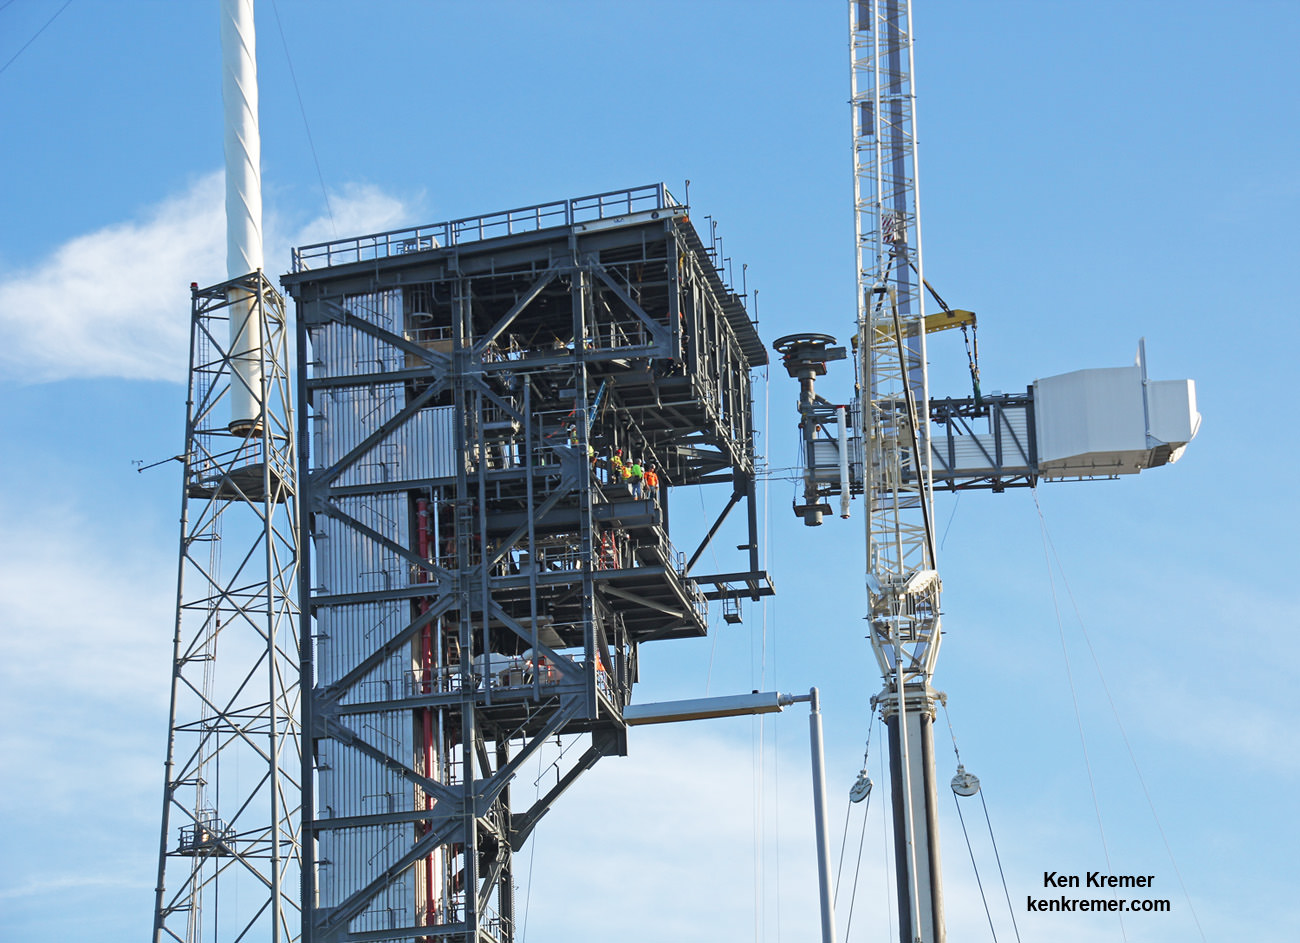 The Crew Access Arm and White Room for Boeing's CST-100 Starliner spacecraft approaches the notch for mating to the Crew Access Tower at Cape Canaveral Air Force Station’s Space Launch Complex 41 at level 13 on Aug. 15, 2016, as workers observe from upper tower level.  Astronauts will walk through the arm to board the Starliner spacecraft stacked atop a United Launch Alliance Atlas V rocket.  Credit: Ken Kremer/kenkremer.com